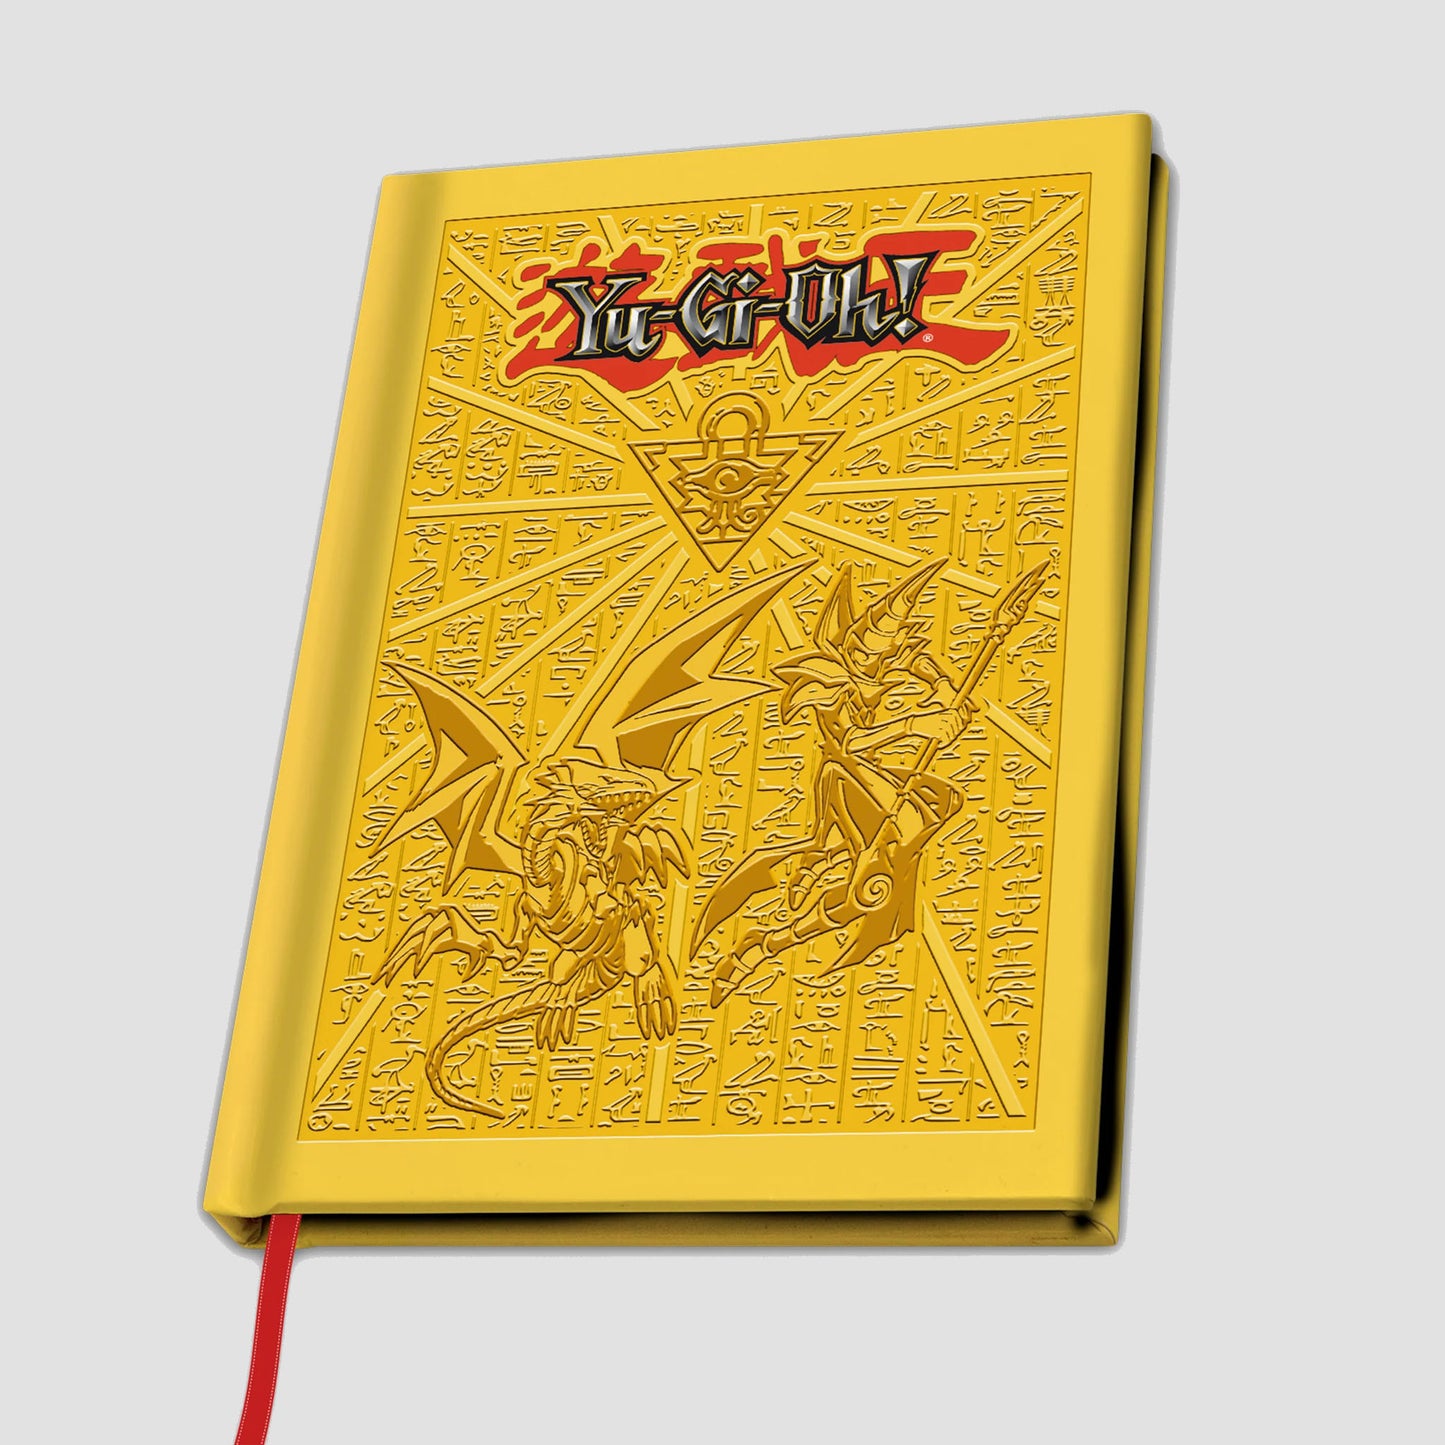 Millenium Puzzle (Yu-Gi-Oh!) Hardcover A5 Notebook